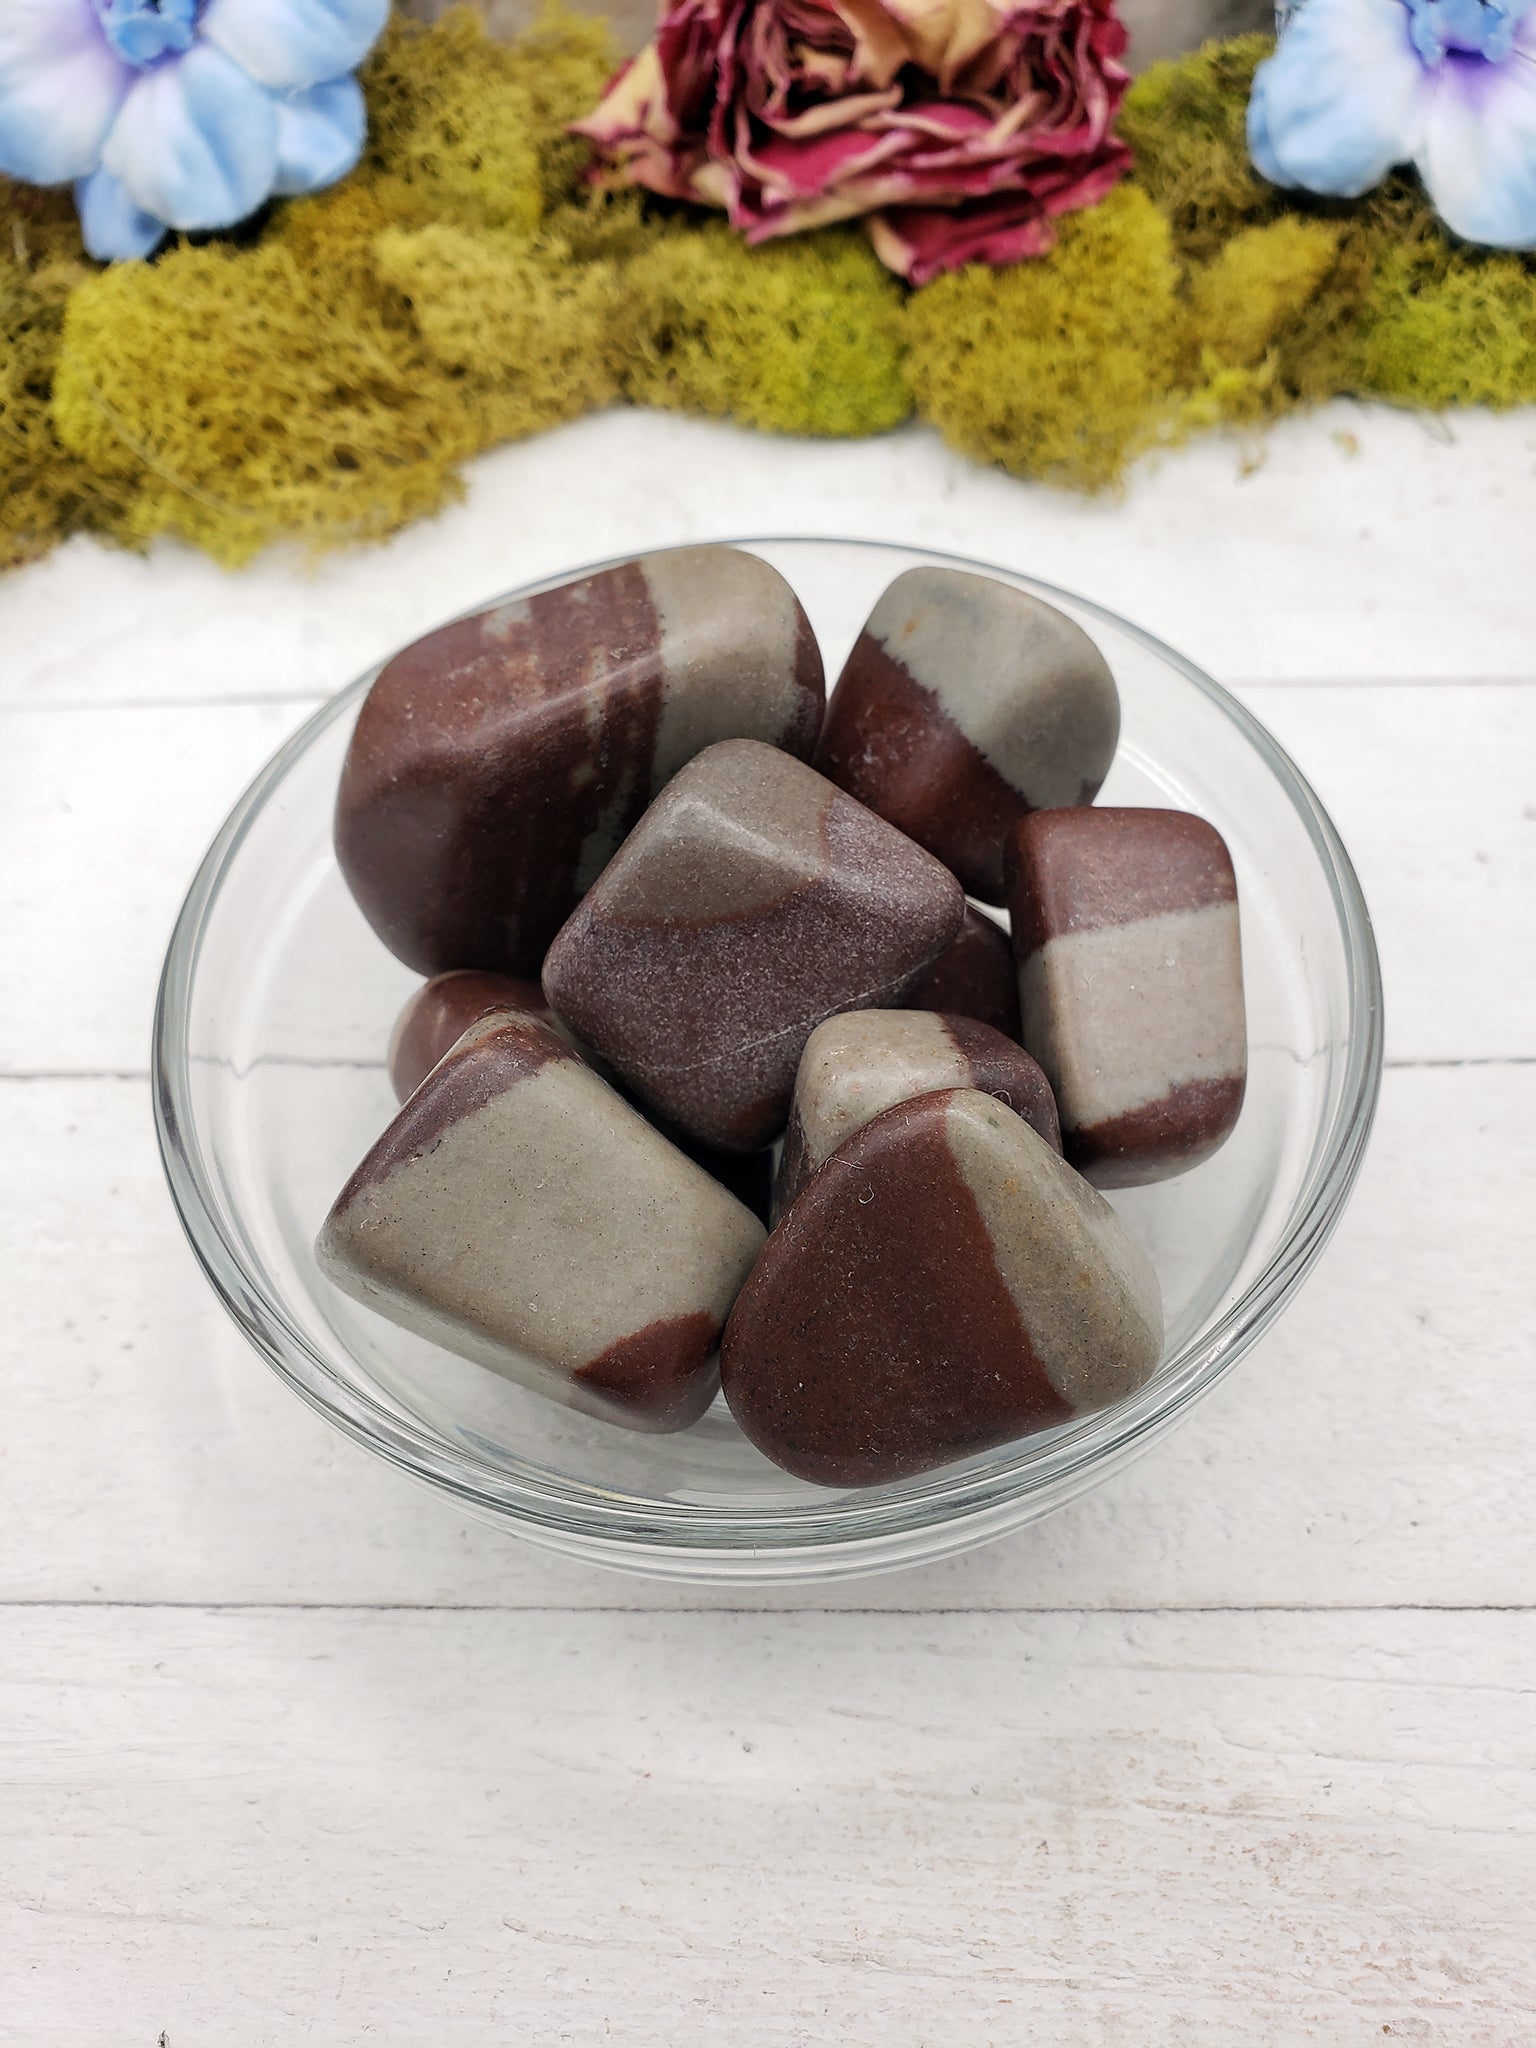 shiva lingam stone pieces in glass bowl